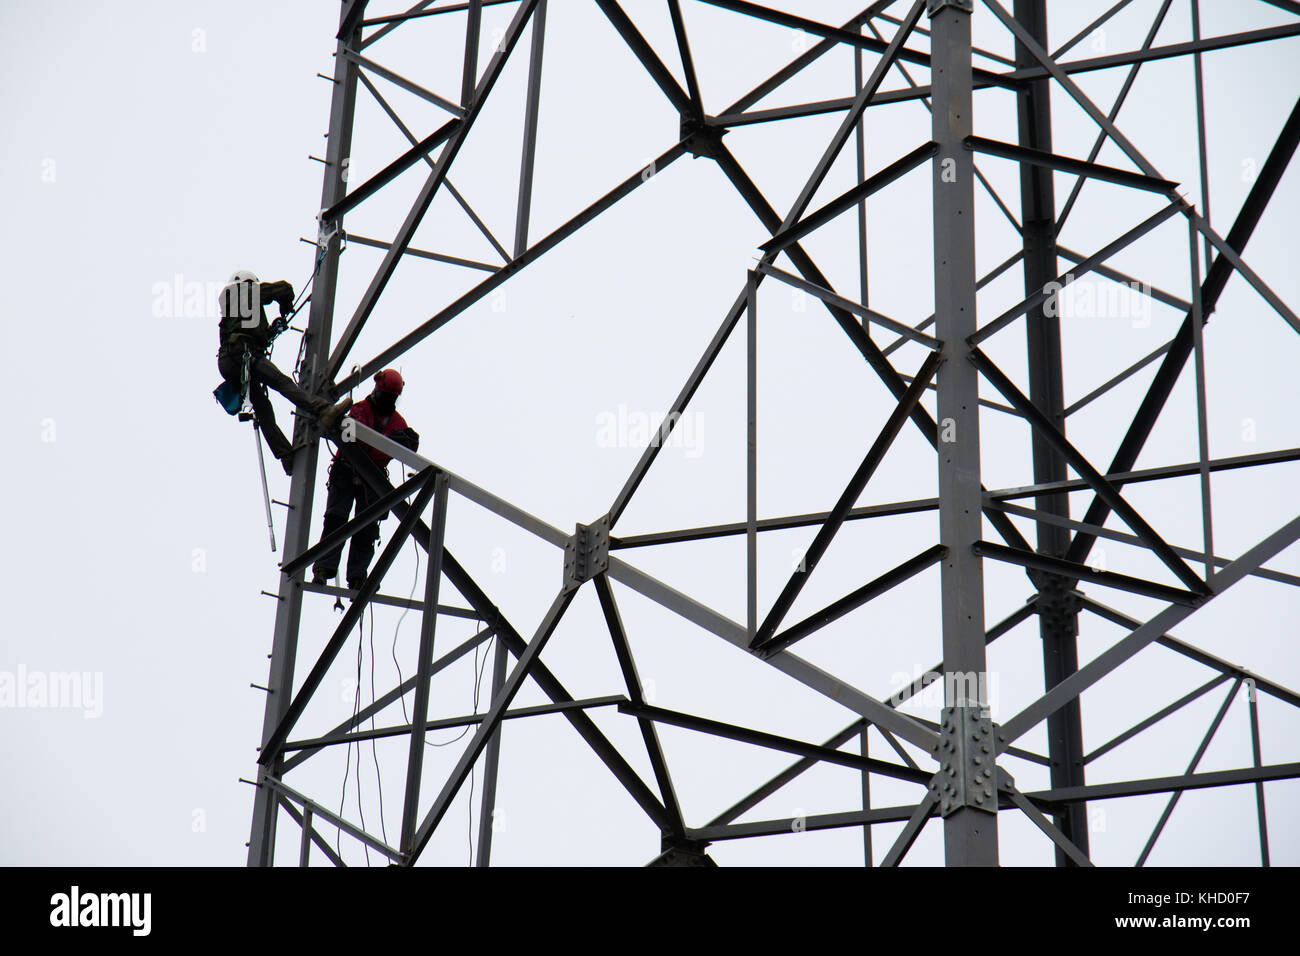 workers on the energy pole. A grid of newly installed energy pole with employees. autumn season Stock Photo